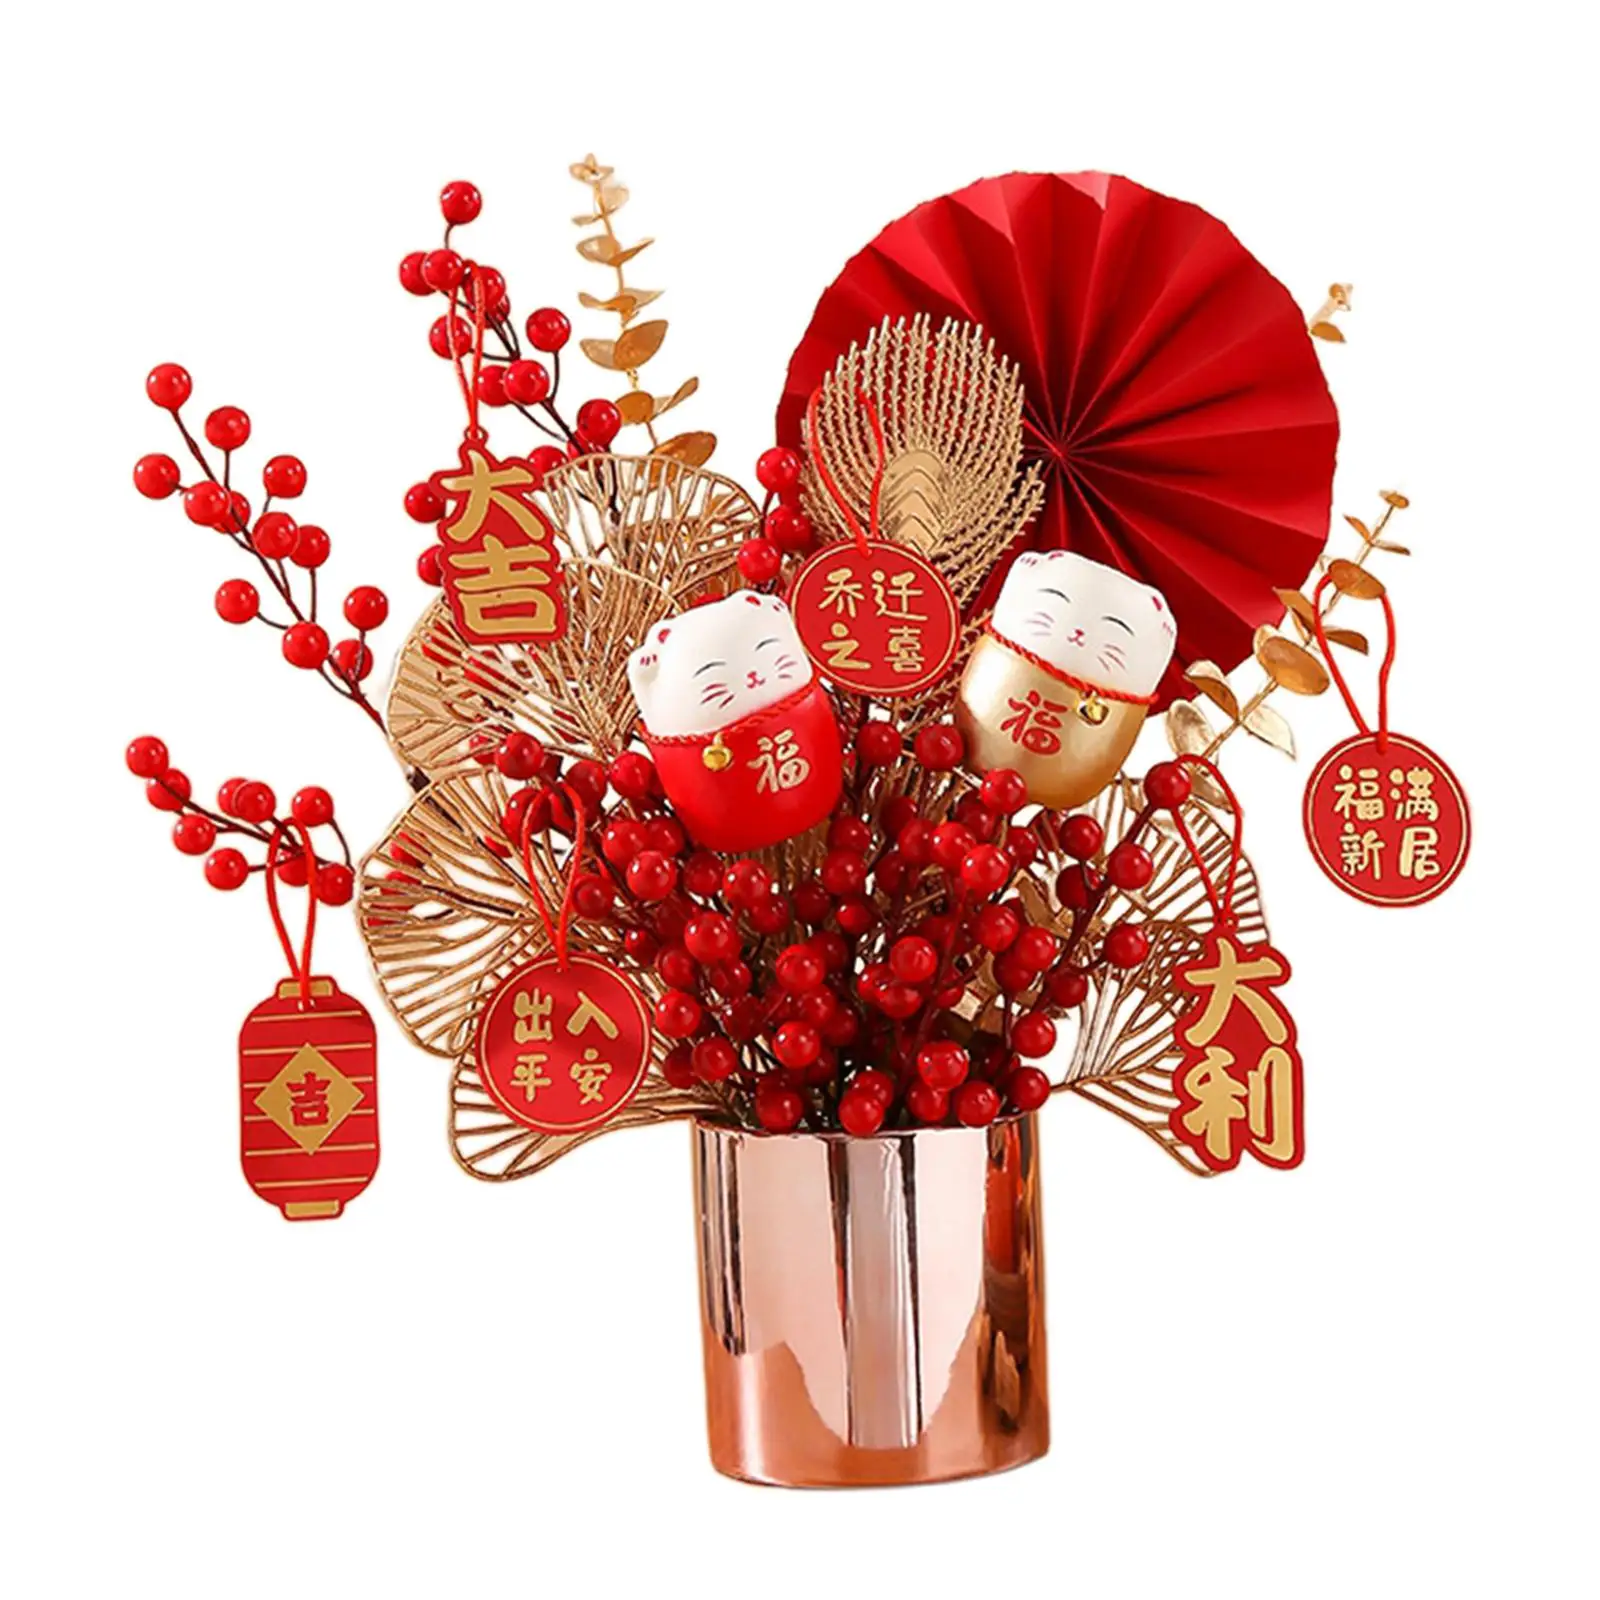 Traditional Chinese New Year Decoration Ornaments for Tabletop Entryway